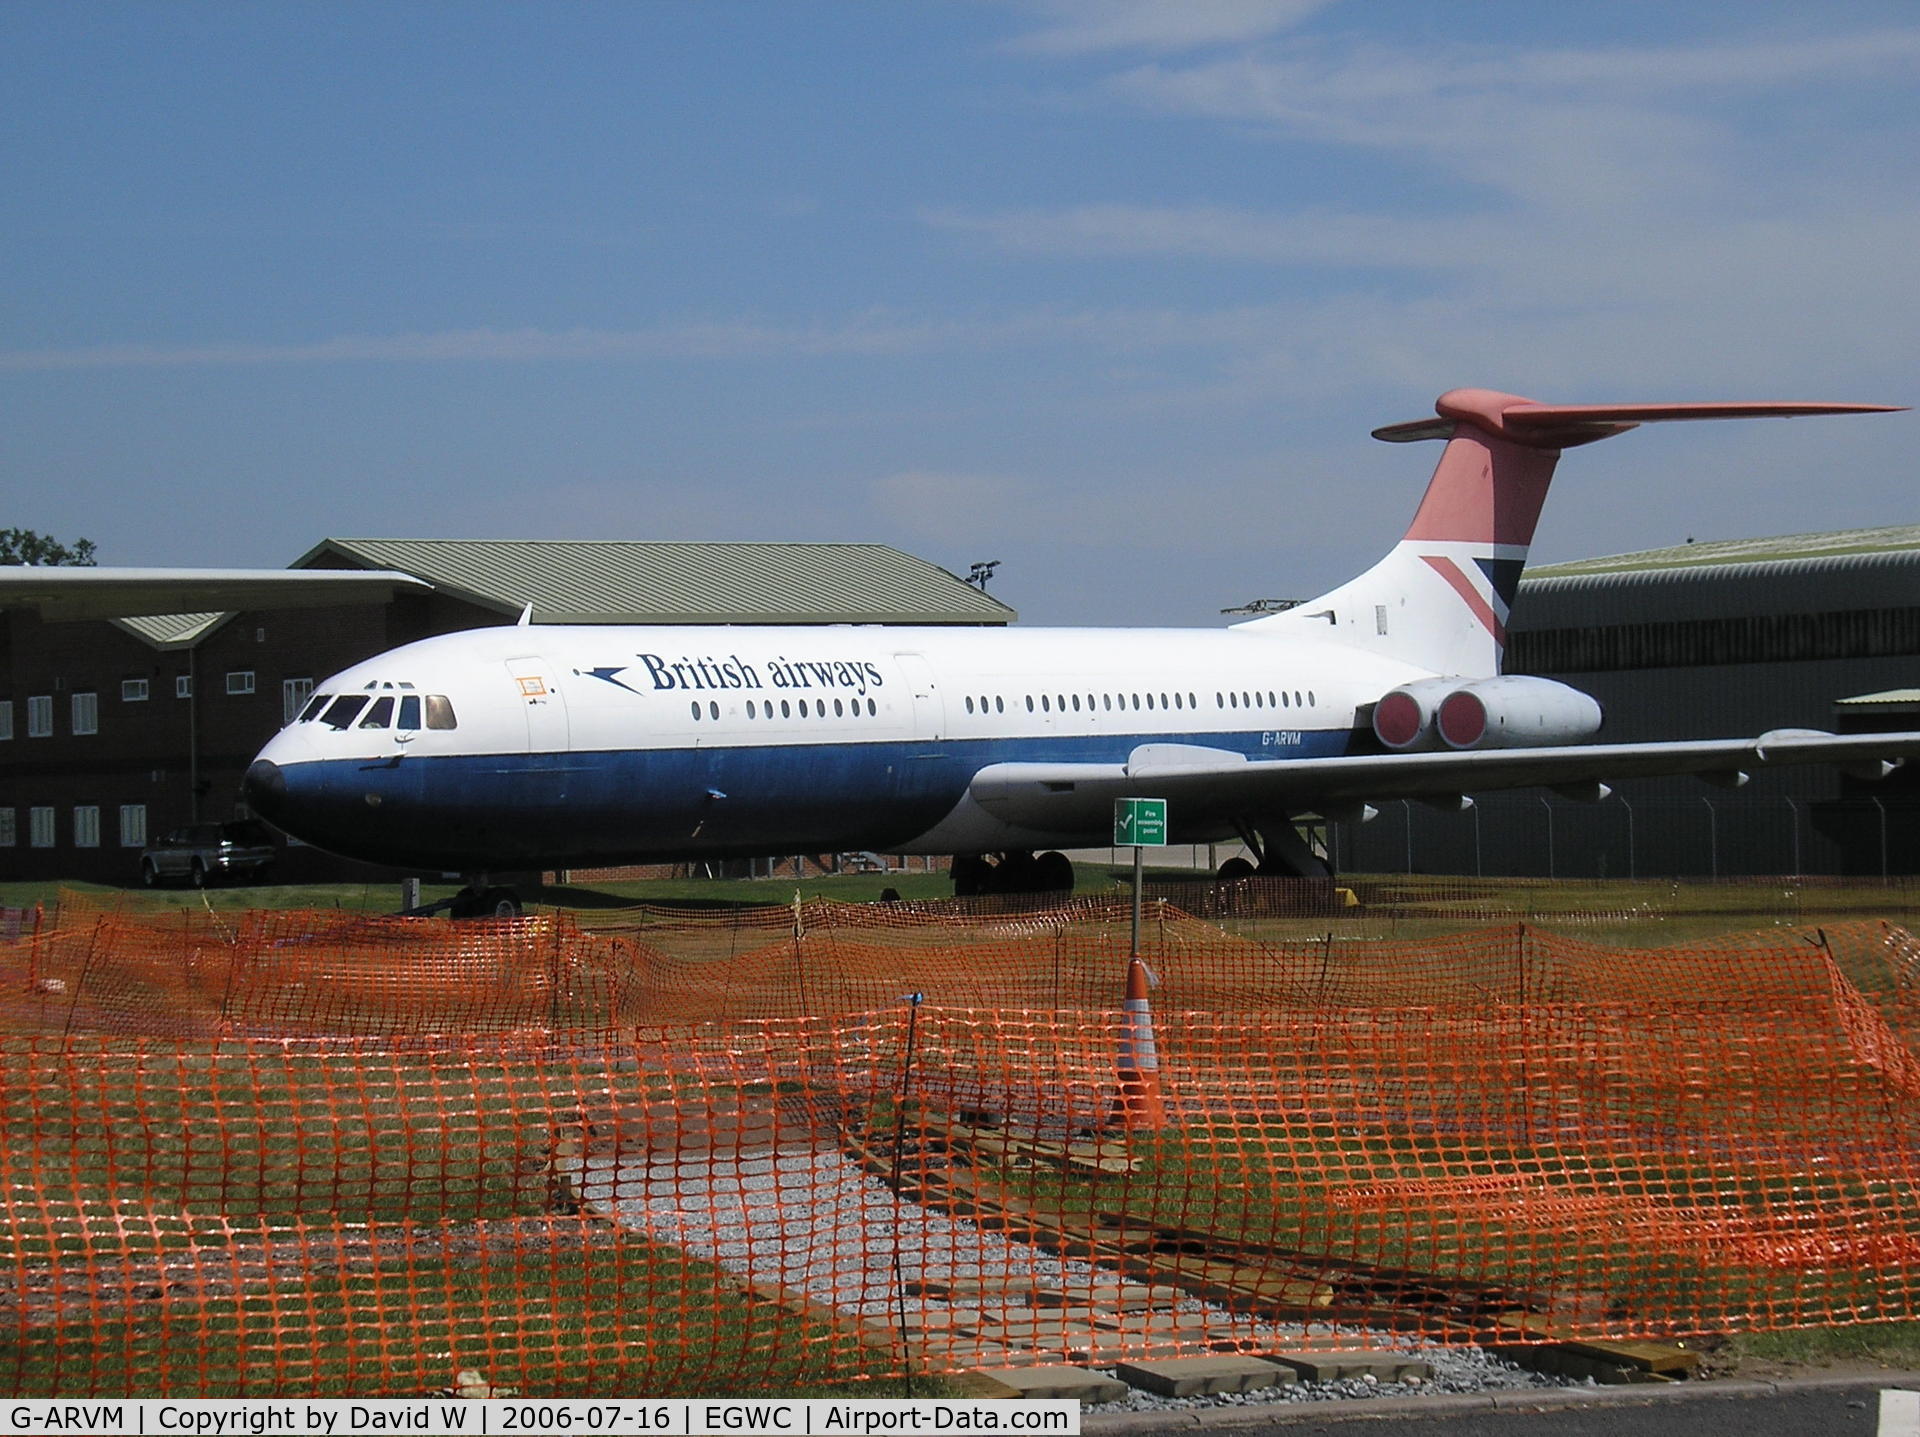 G-ARVM, 1964 Vickers VC10 Srs 1101 C/N 815, Broken up a few weeks later after being on display here since 79.